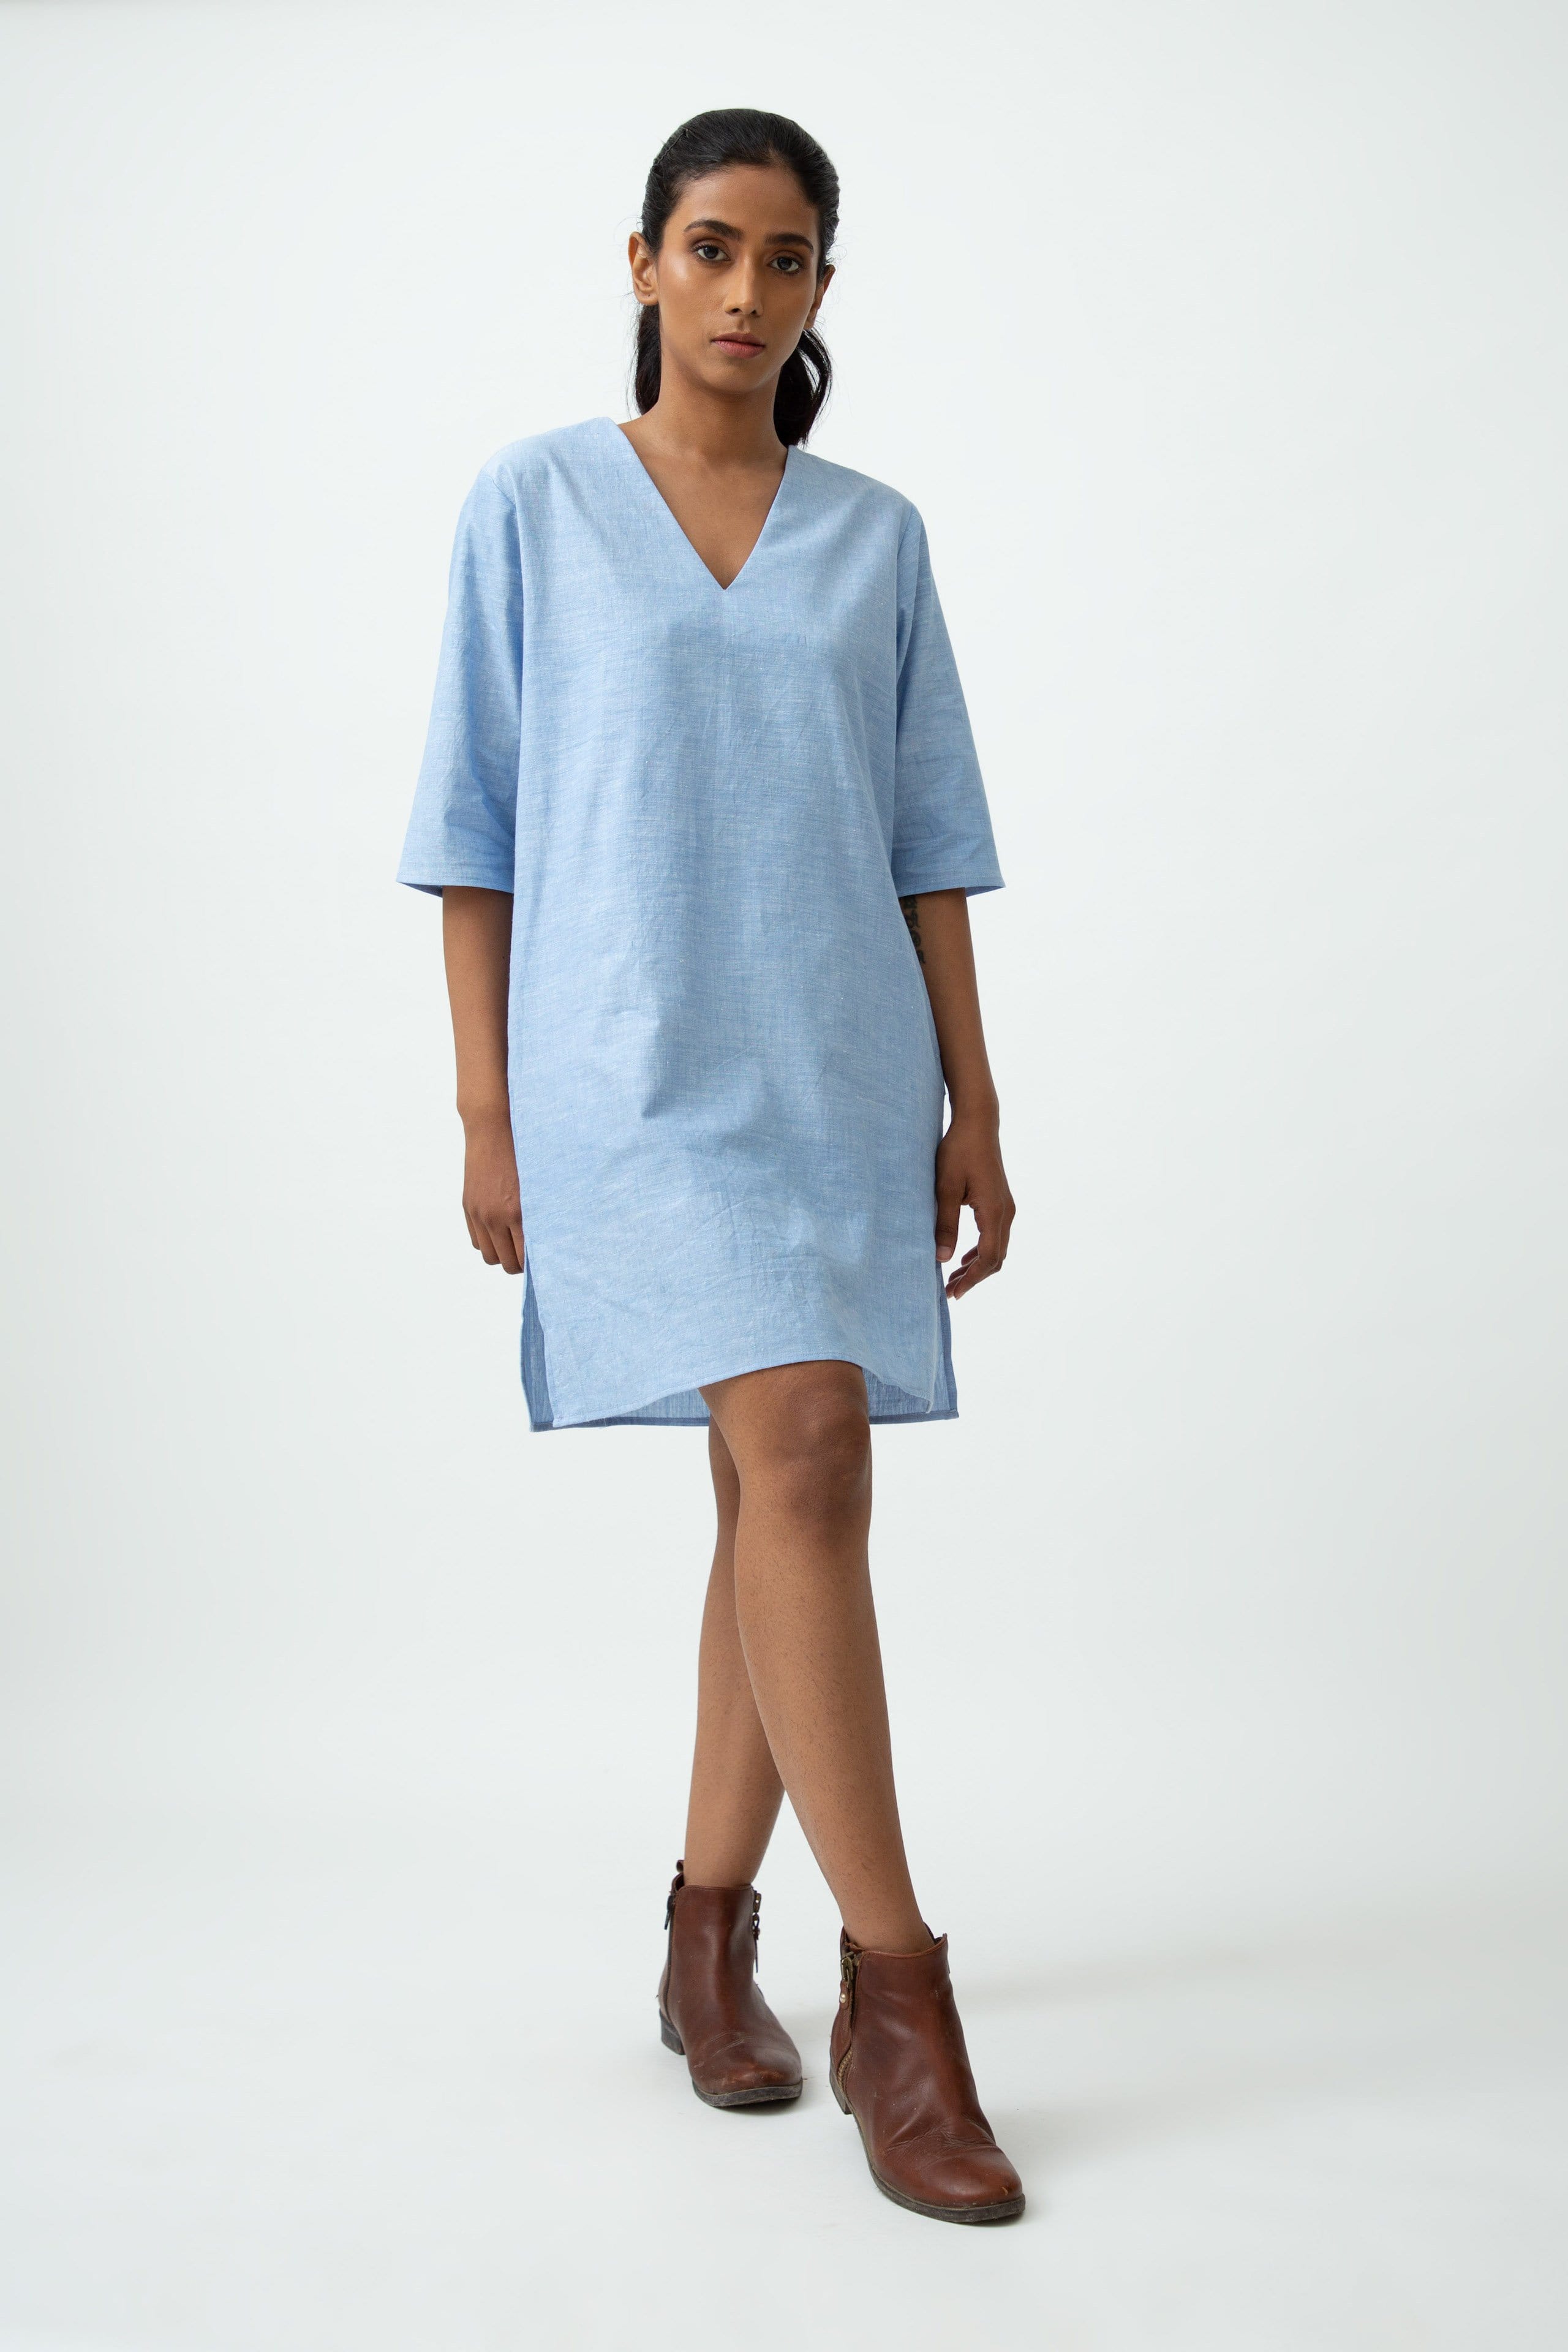 Saltpetre womens casual and lounge wear - sky blue. Three-quarter sleeves with v-shaped neck one-piece.